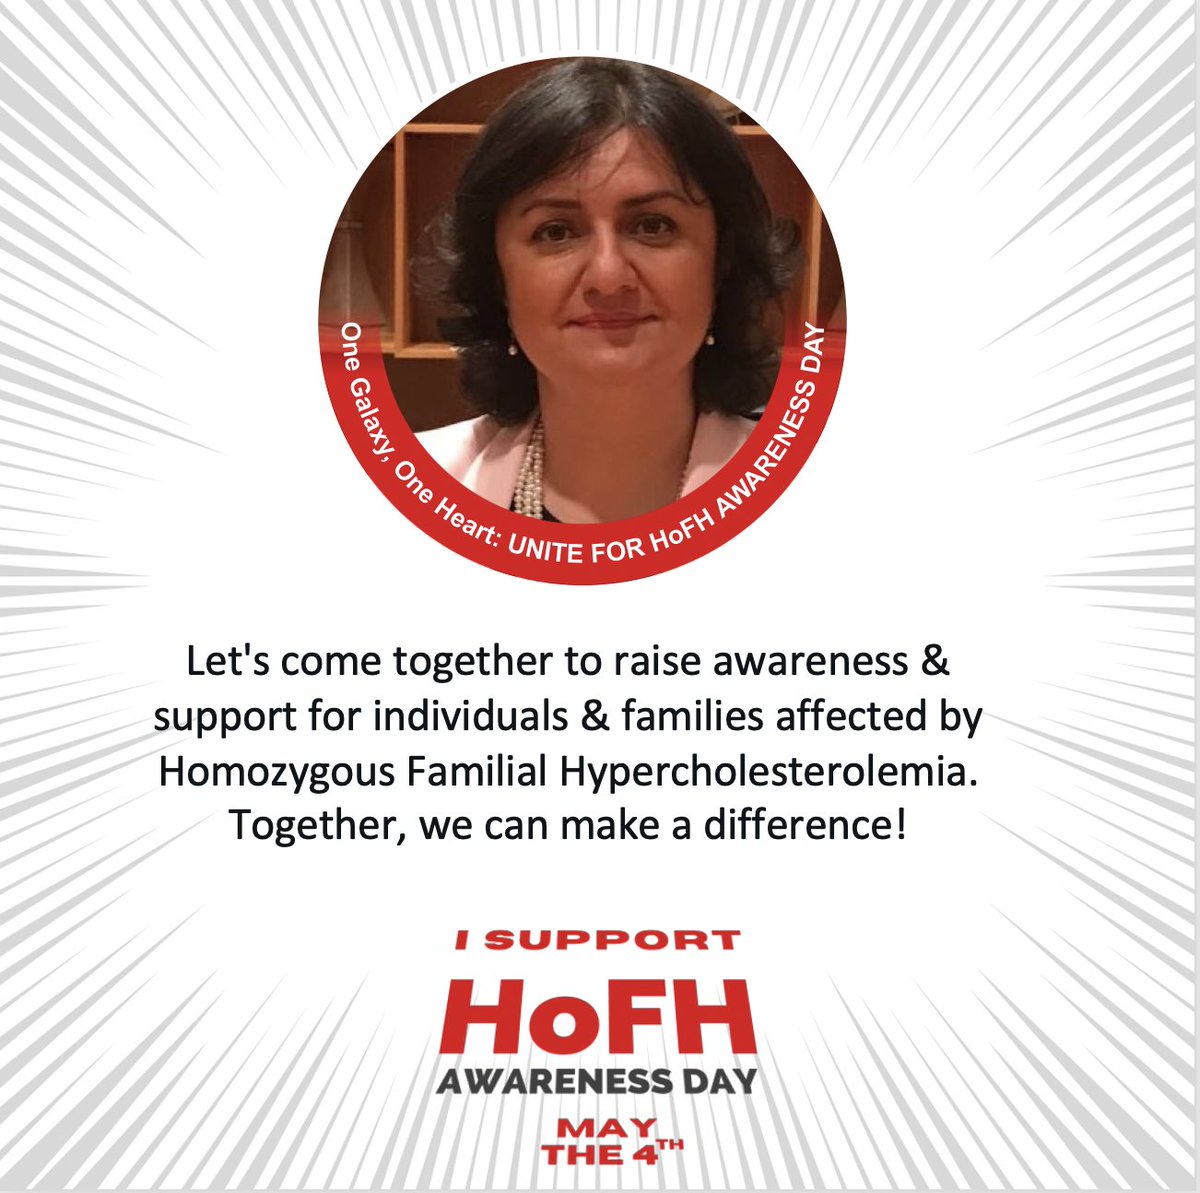 Starting today, May 4th will be recognized as #HoFH #AwarenessDay! Let's come together to raise awareness & support for individuals & families affected by Homozygous Familial Hypercholesterolemia. Together, we can make a difference! 💙 #HoFHawareness So proud to be part of